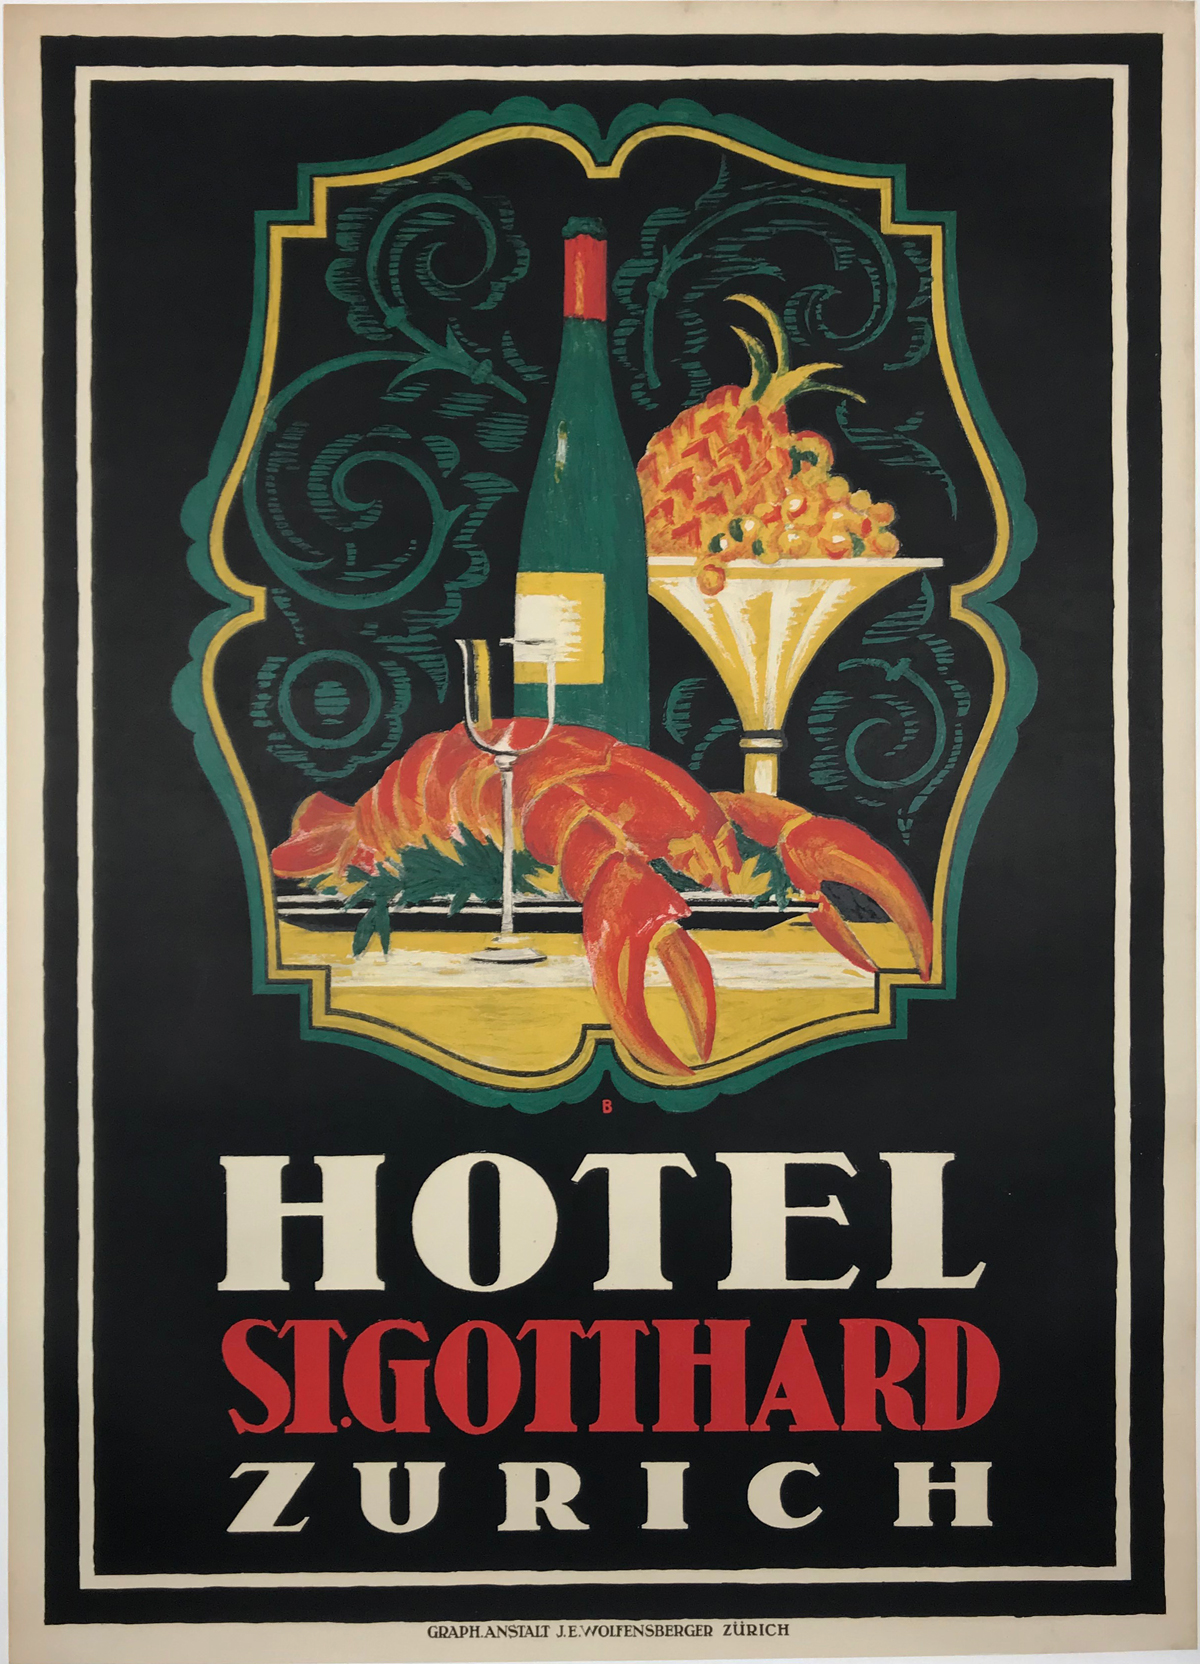 Hotel St. Gotthard Zurich by Otto Baumberger Original 1917 Vintage Swiss Stone Lithograph Advertising Poster Linen Backed.